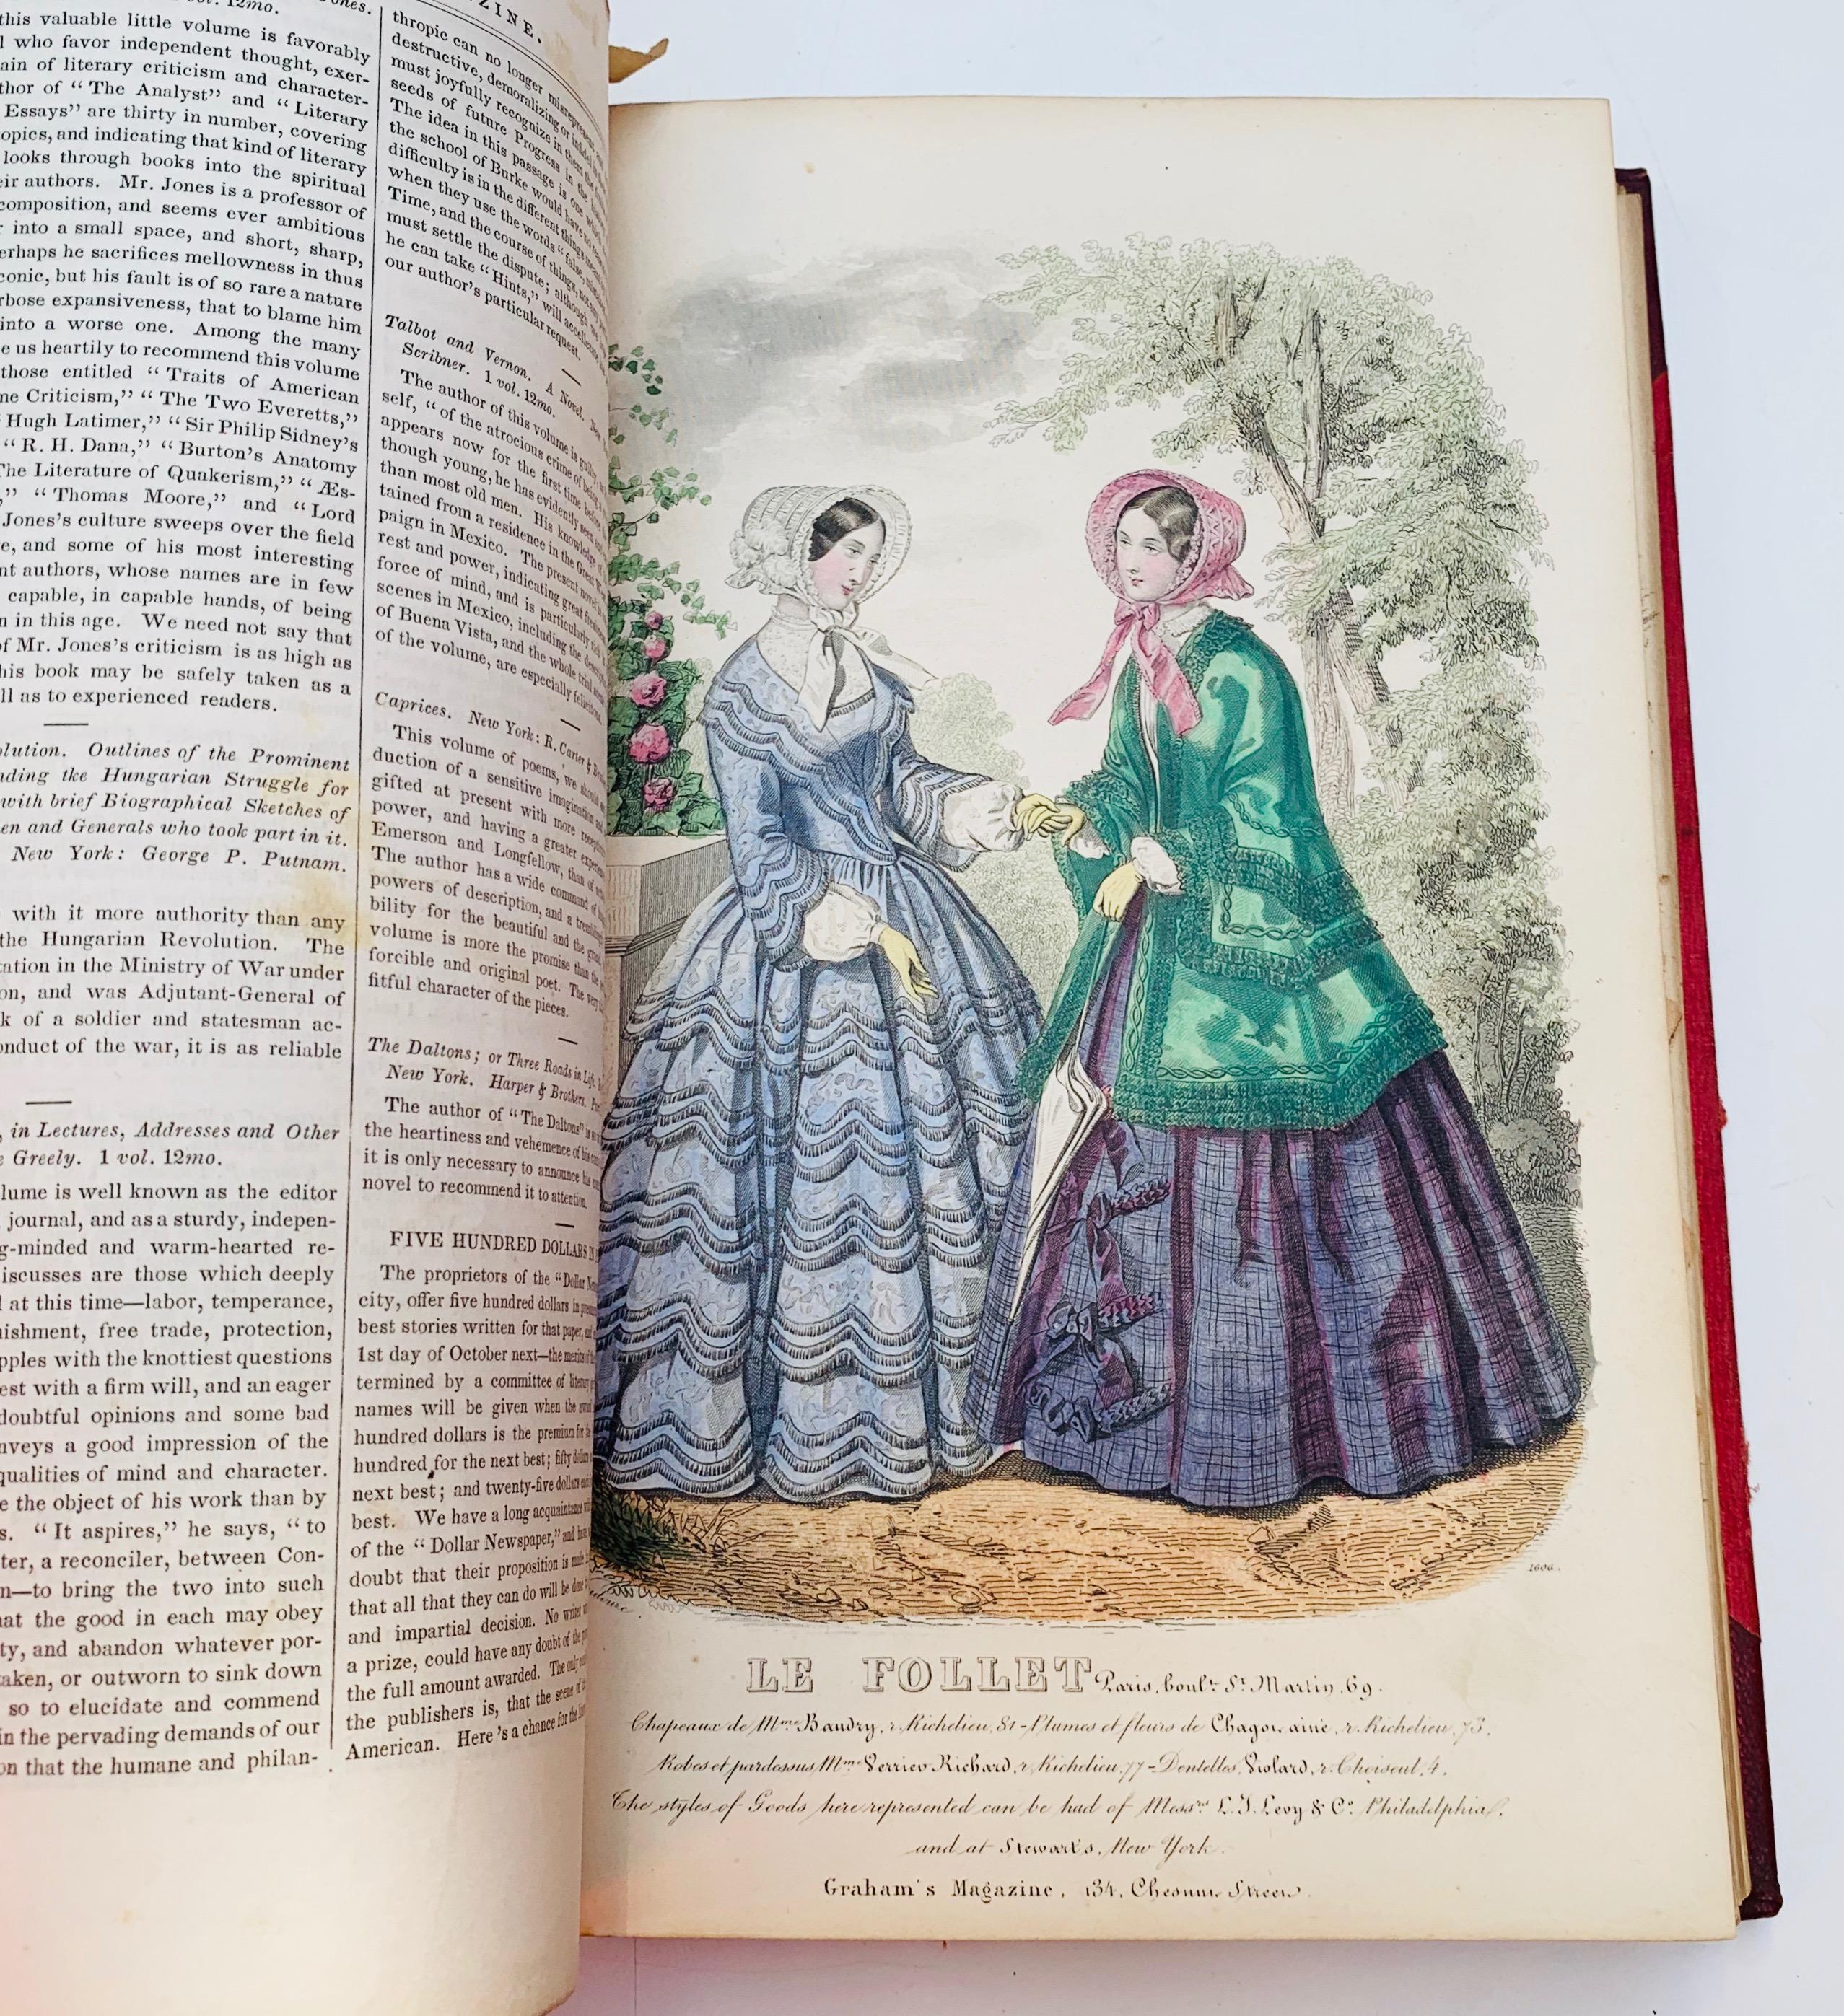 GRAHAM'S MAGAZINE (1850) with Color Fashion Illustrations - VERY NICE